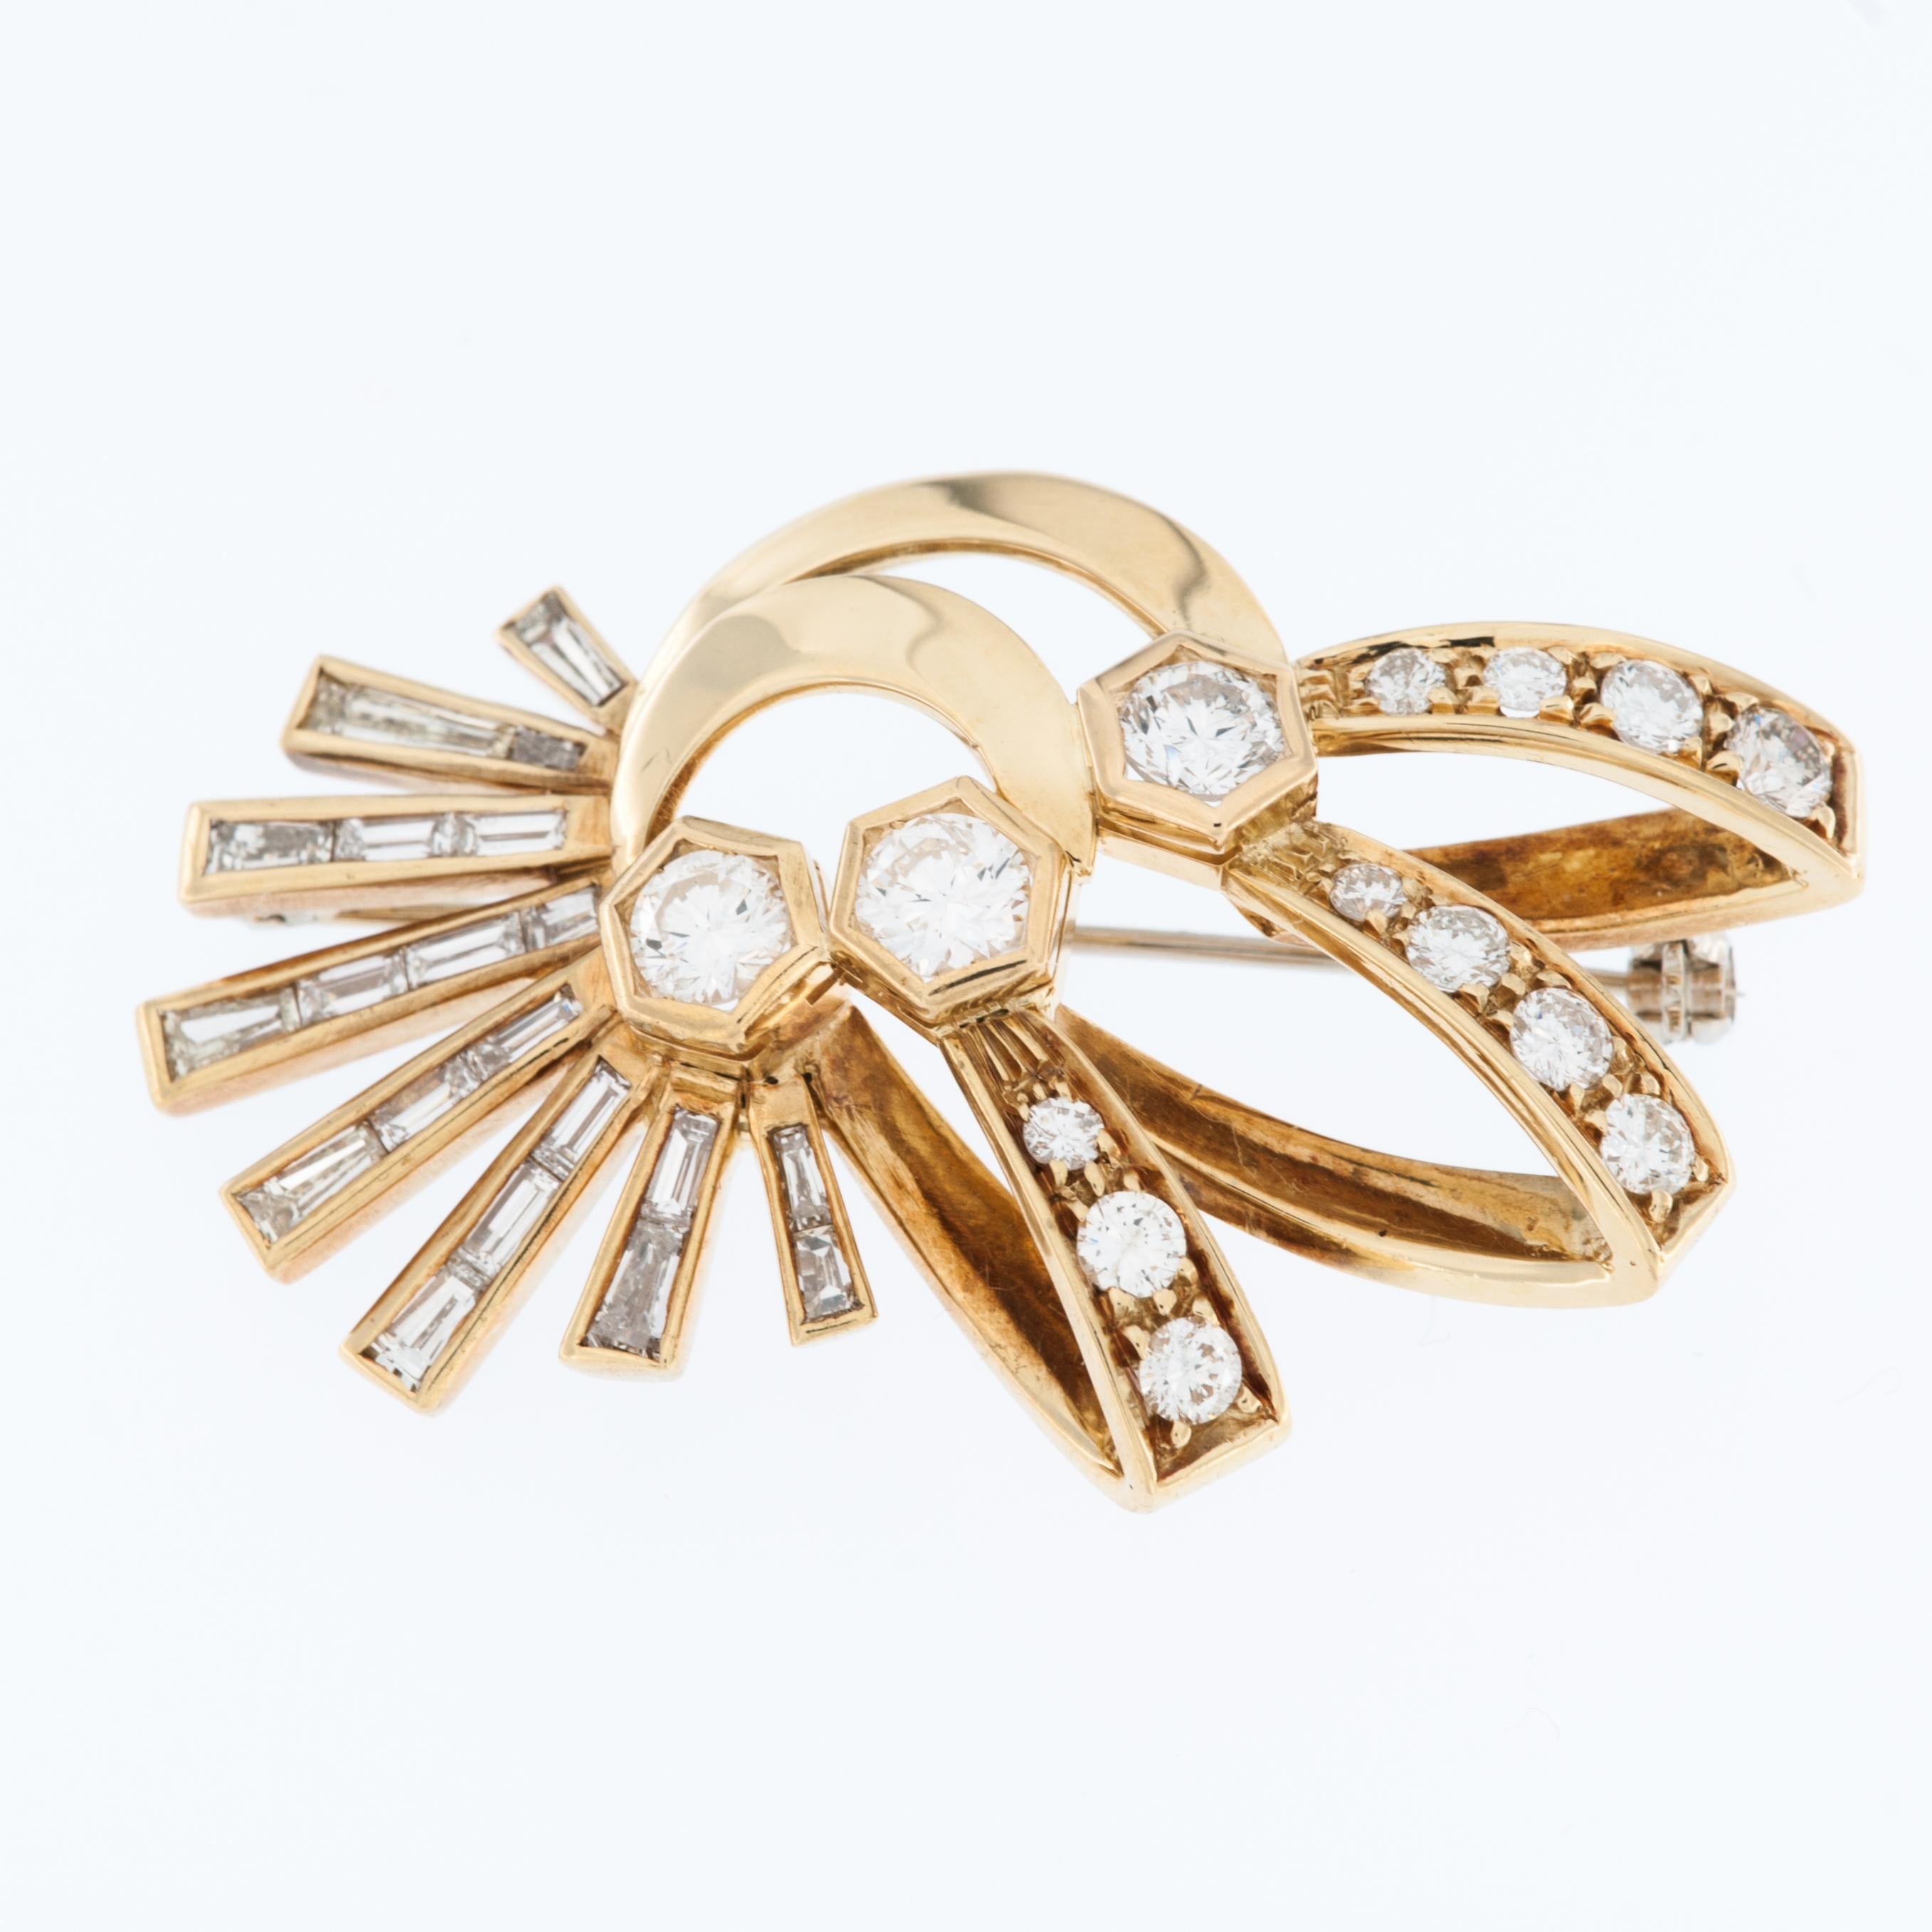 The HRD Certified Antique French Brooch is an exquisite and timeless piece of jewelry that combines the charm of antique design with the allure of diamonds. Crafted in 18-karat yellow gold, this brooch showcases meticulous craftsmanship and